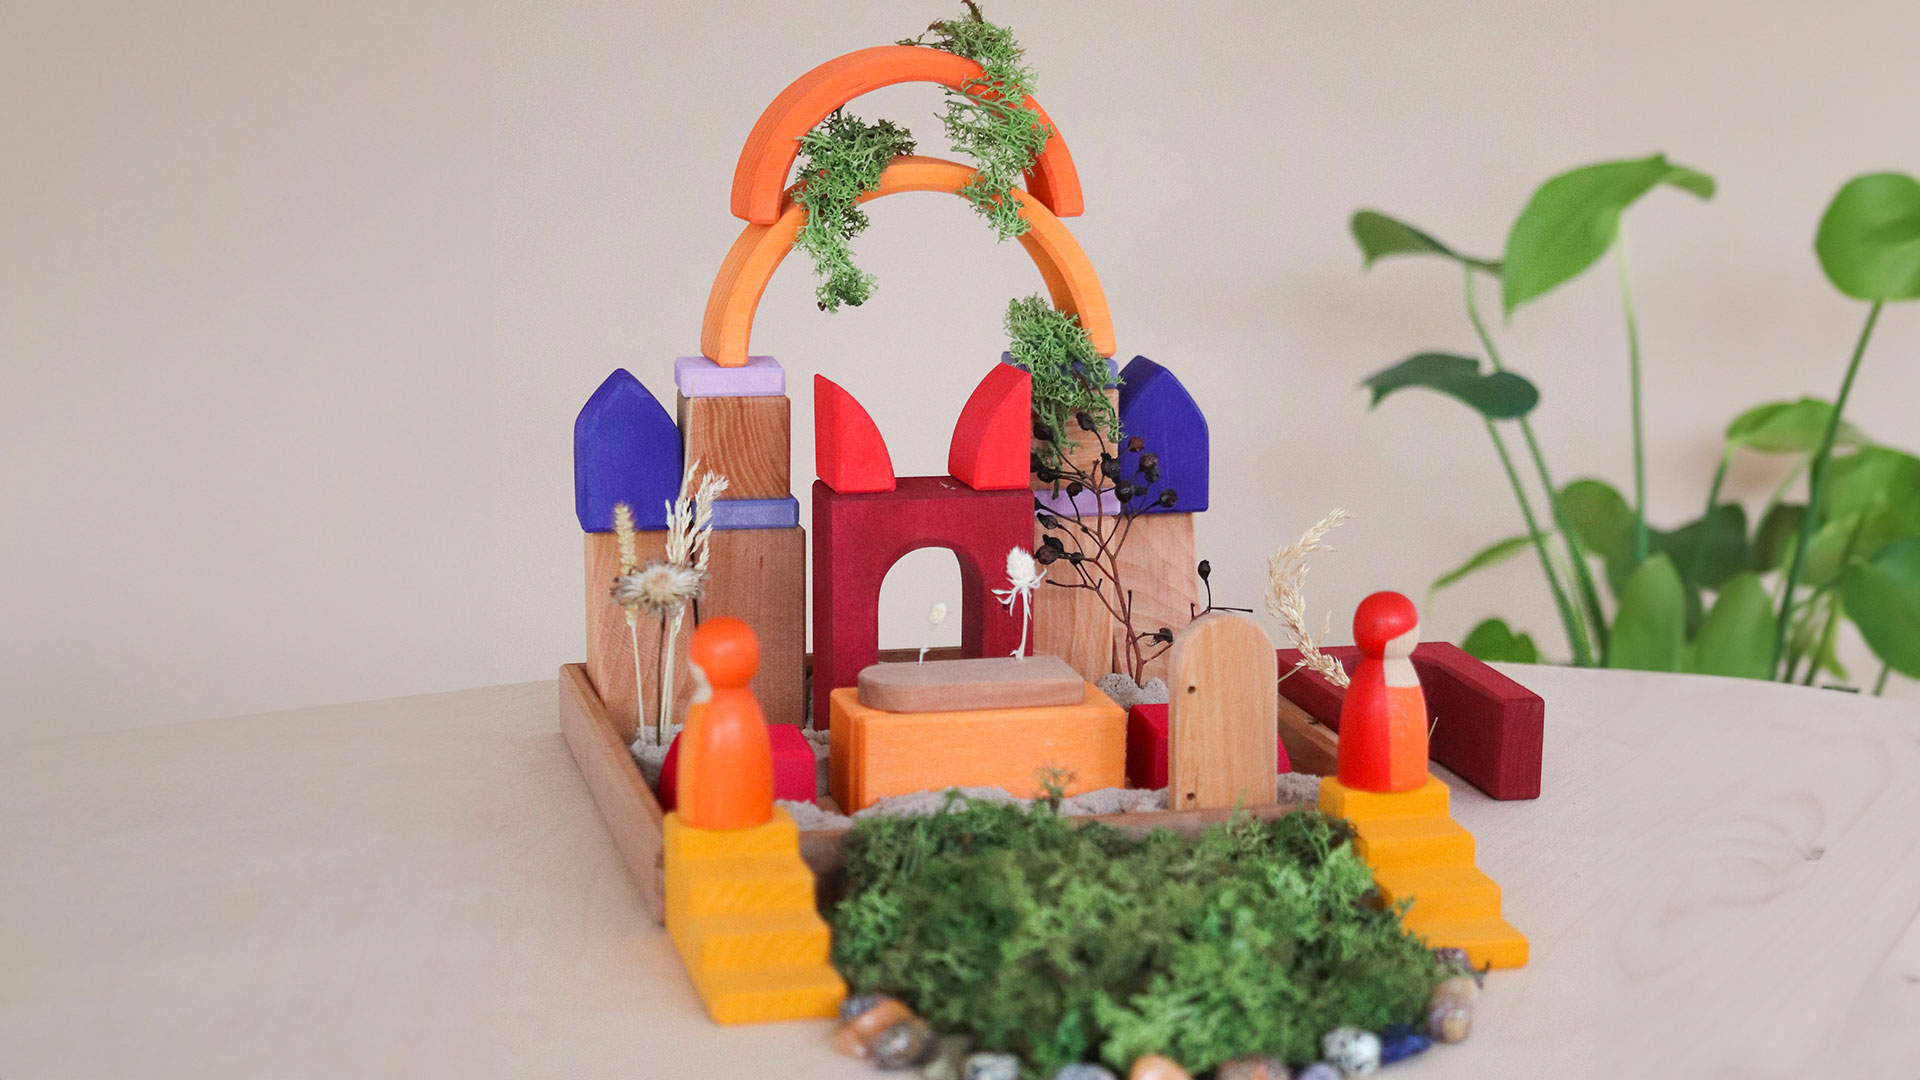 Wooden blocks and natural materials are arranged as a play landscape.